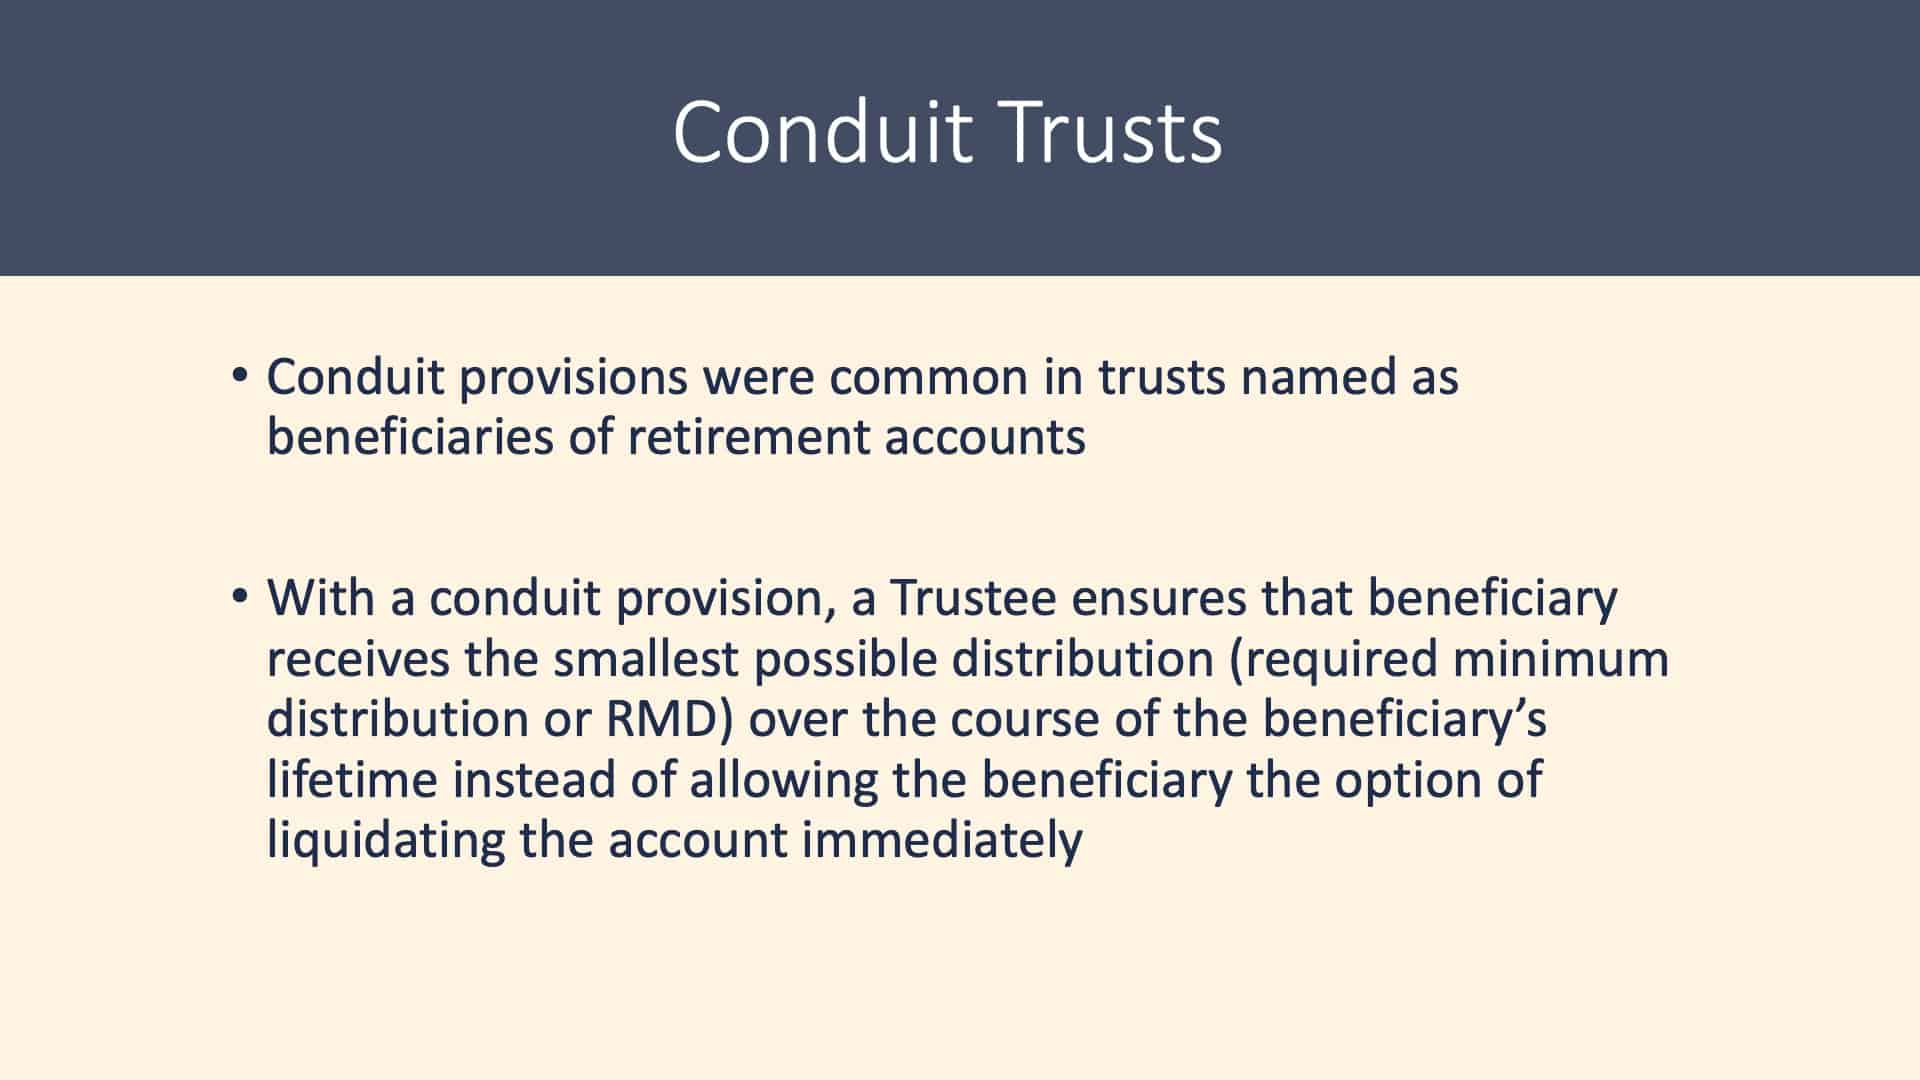 Is a Will Enough? - Conduit Trusts